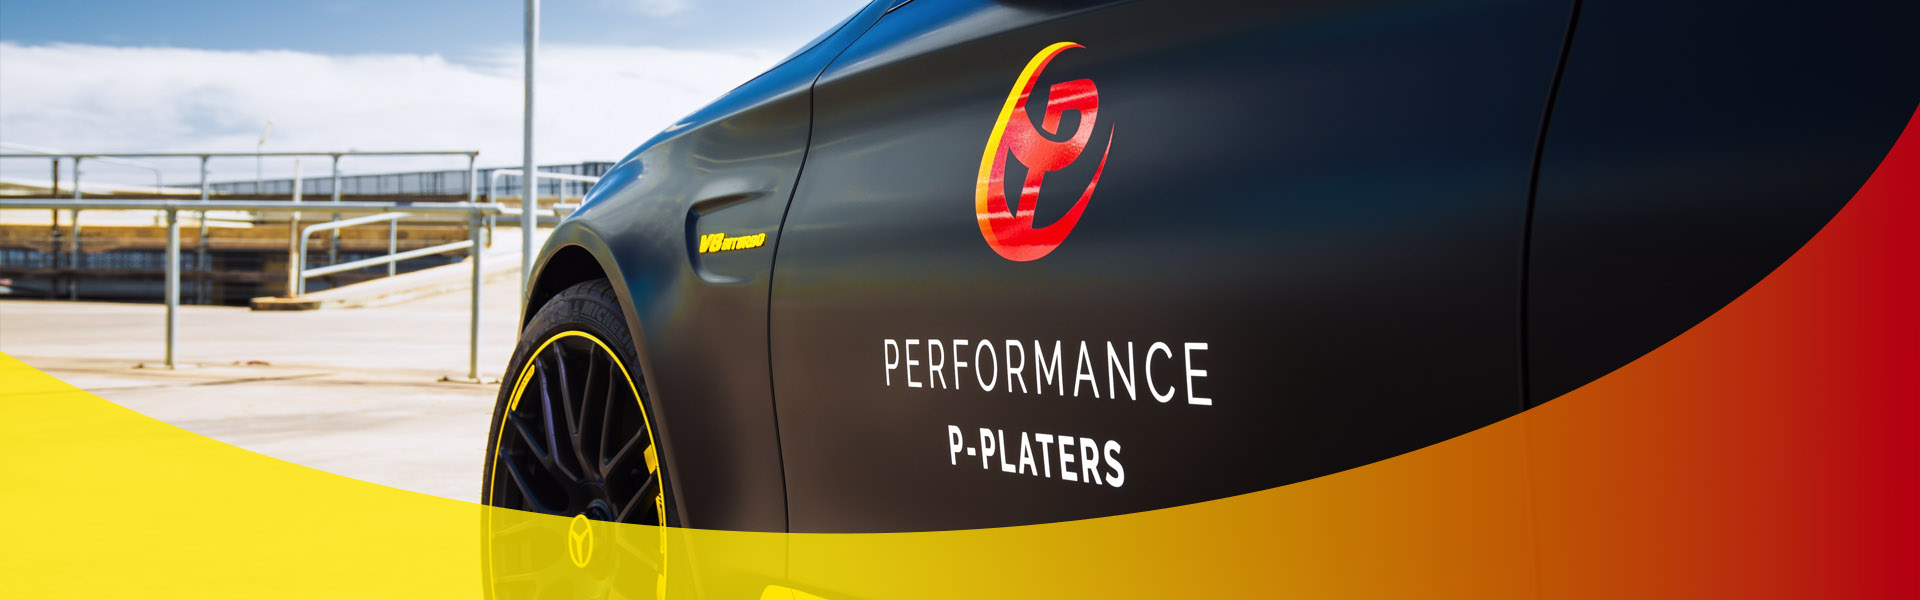 performance p-platers